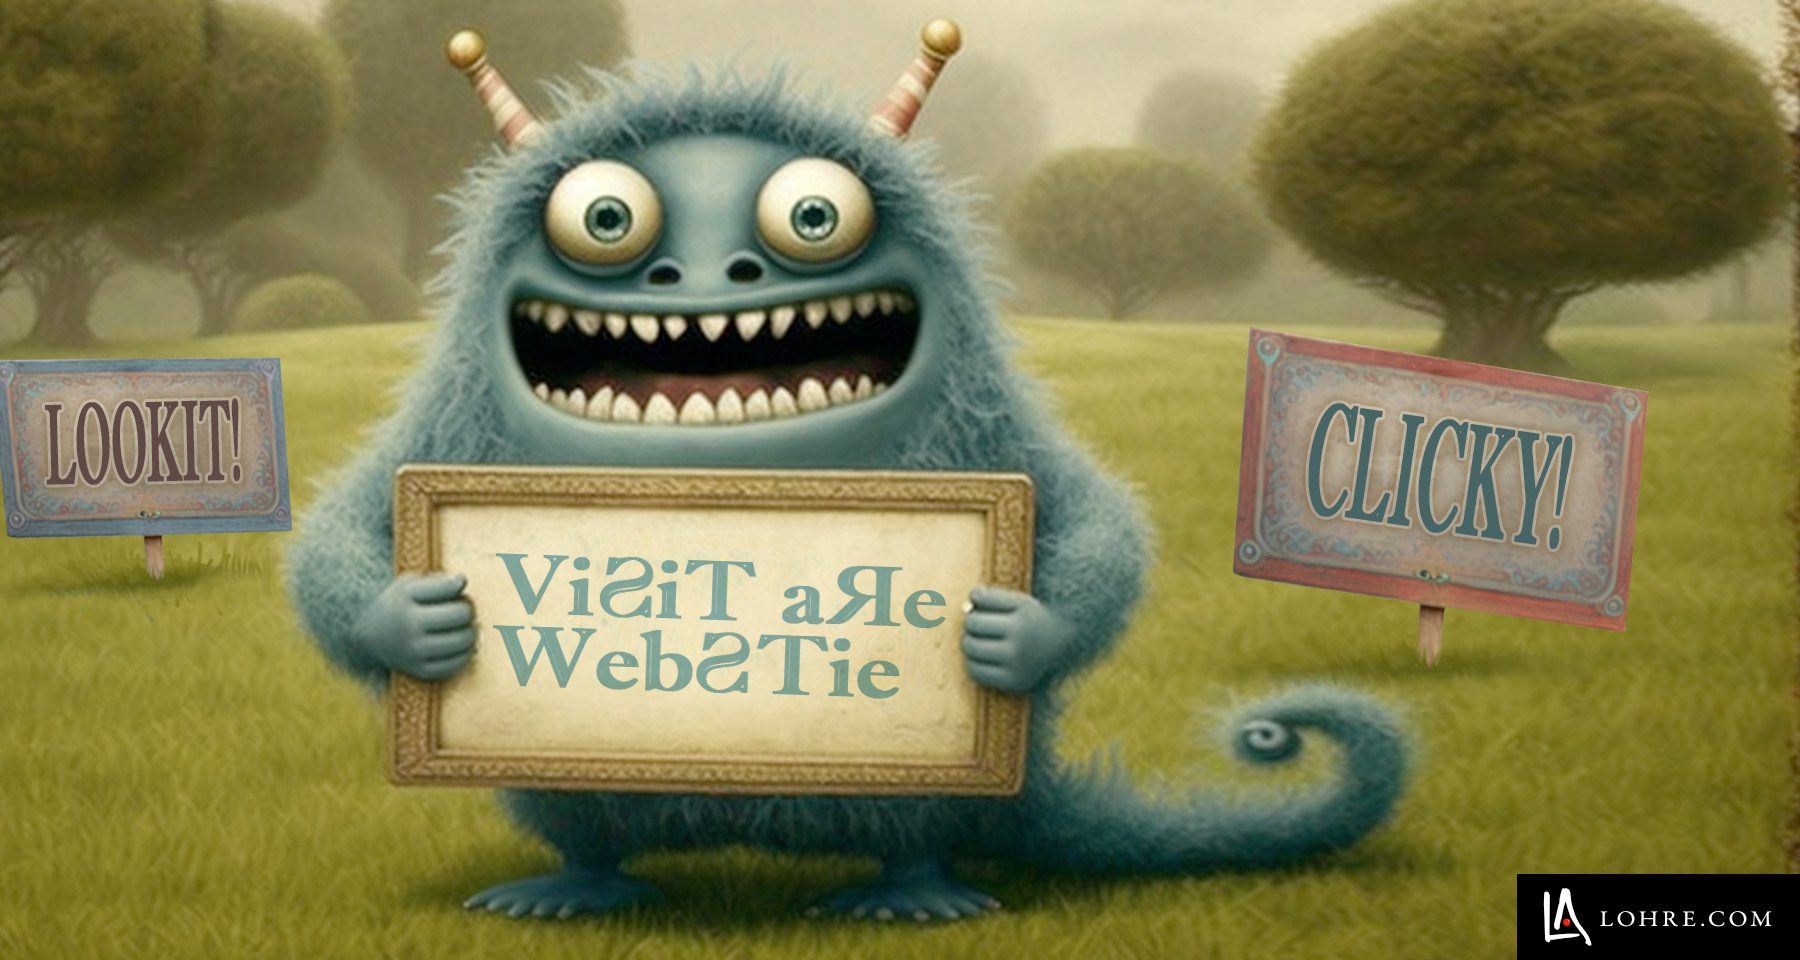 Monster surrounded by crude wooden signs as an image for industrial programmatic advertising